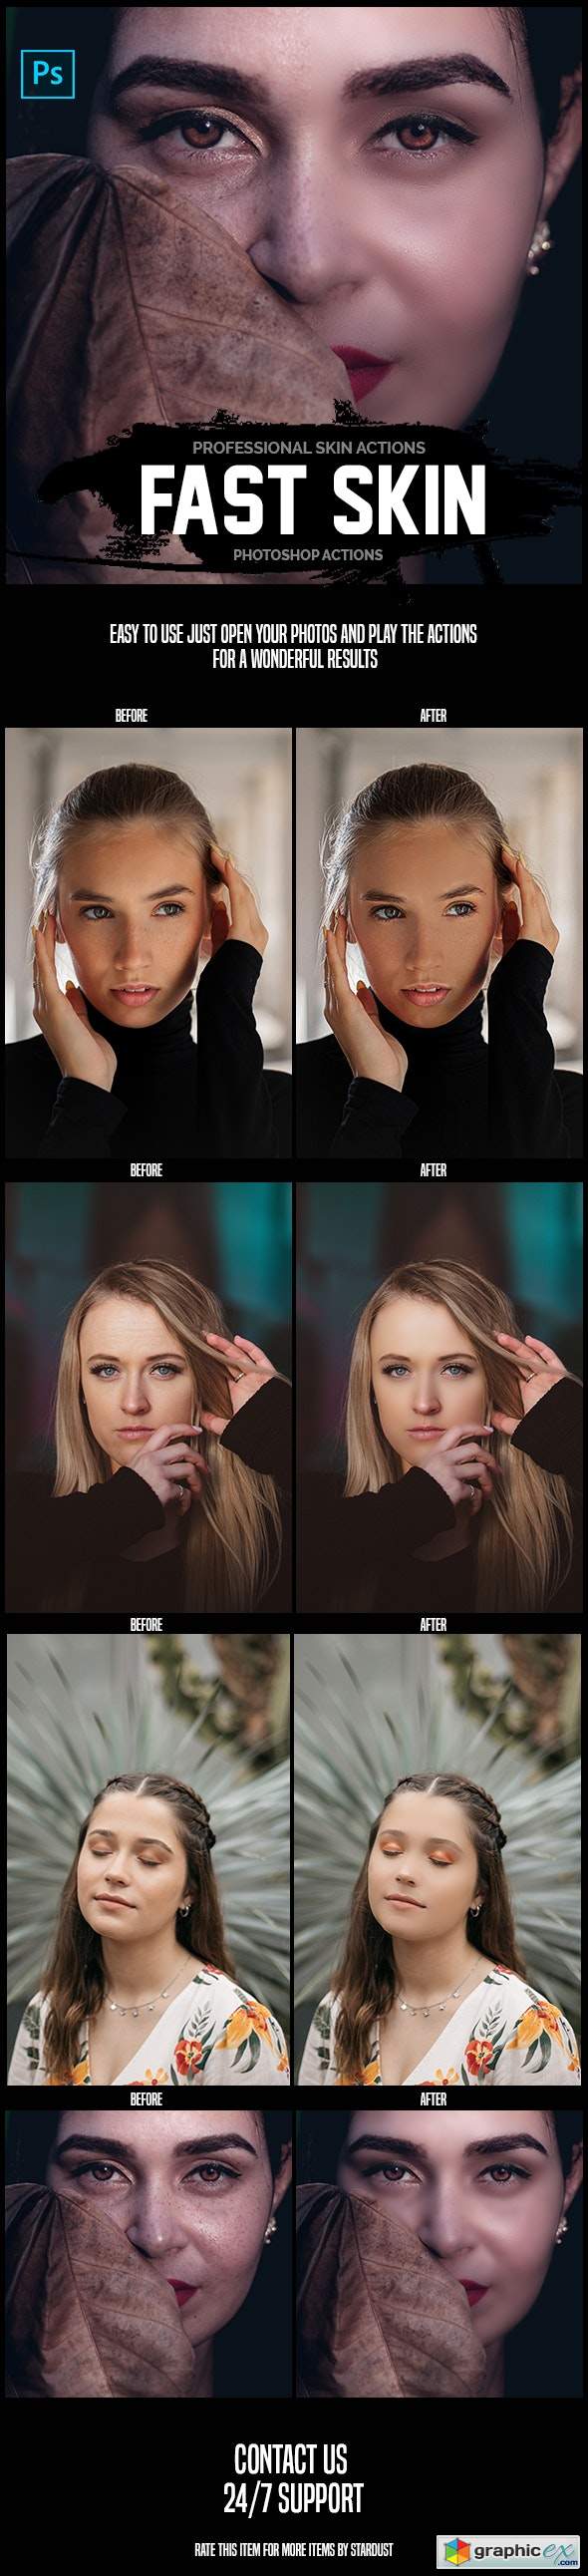 Fast Skin - Professional Photoshop Actions 